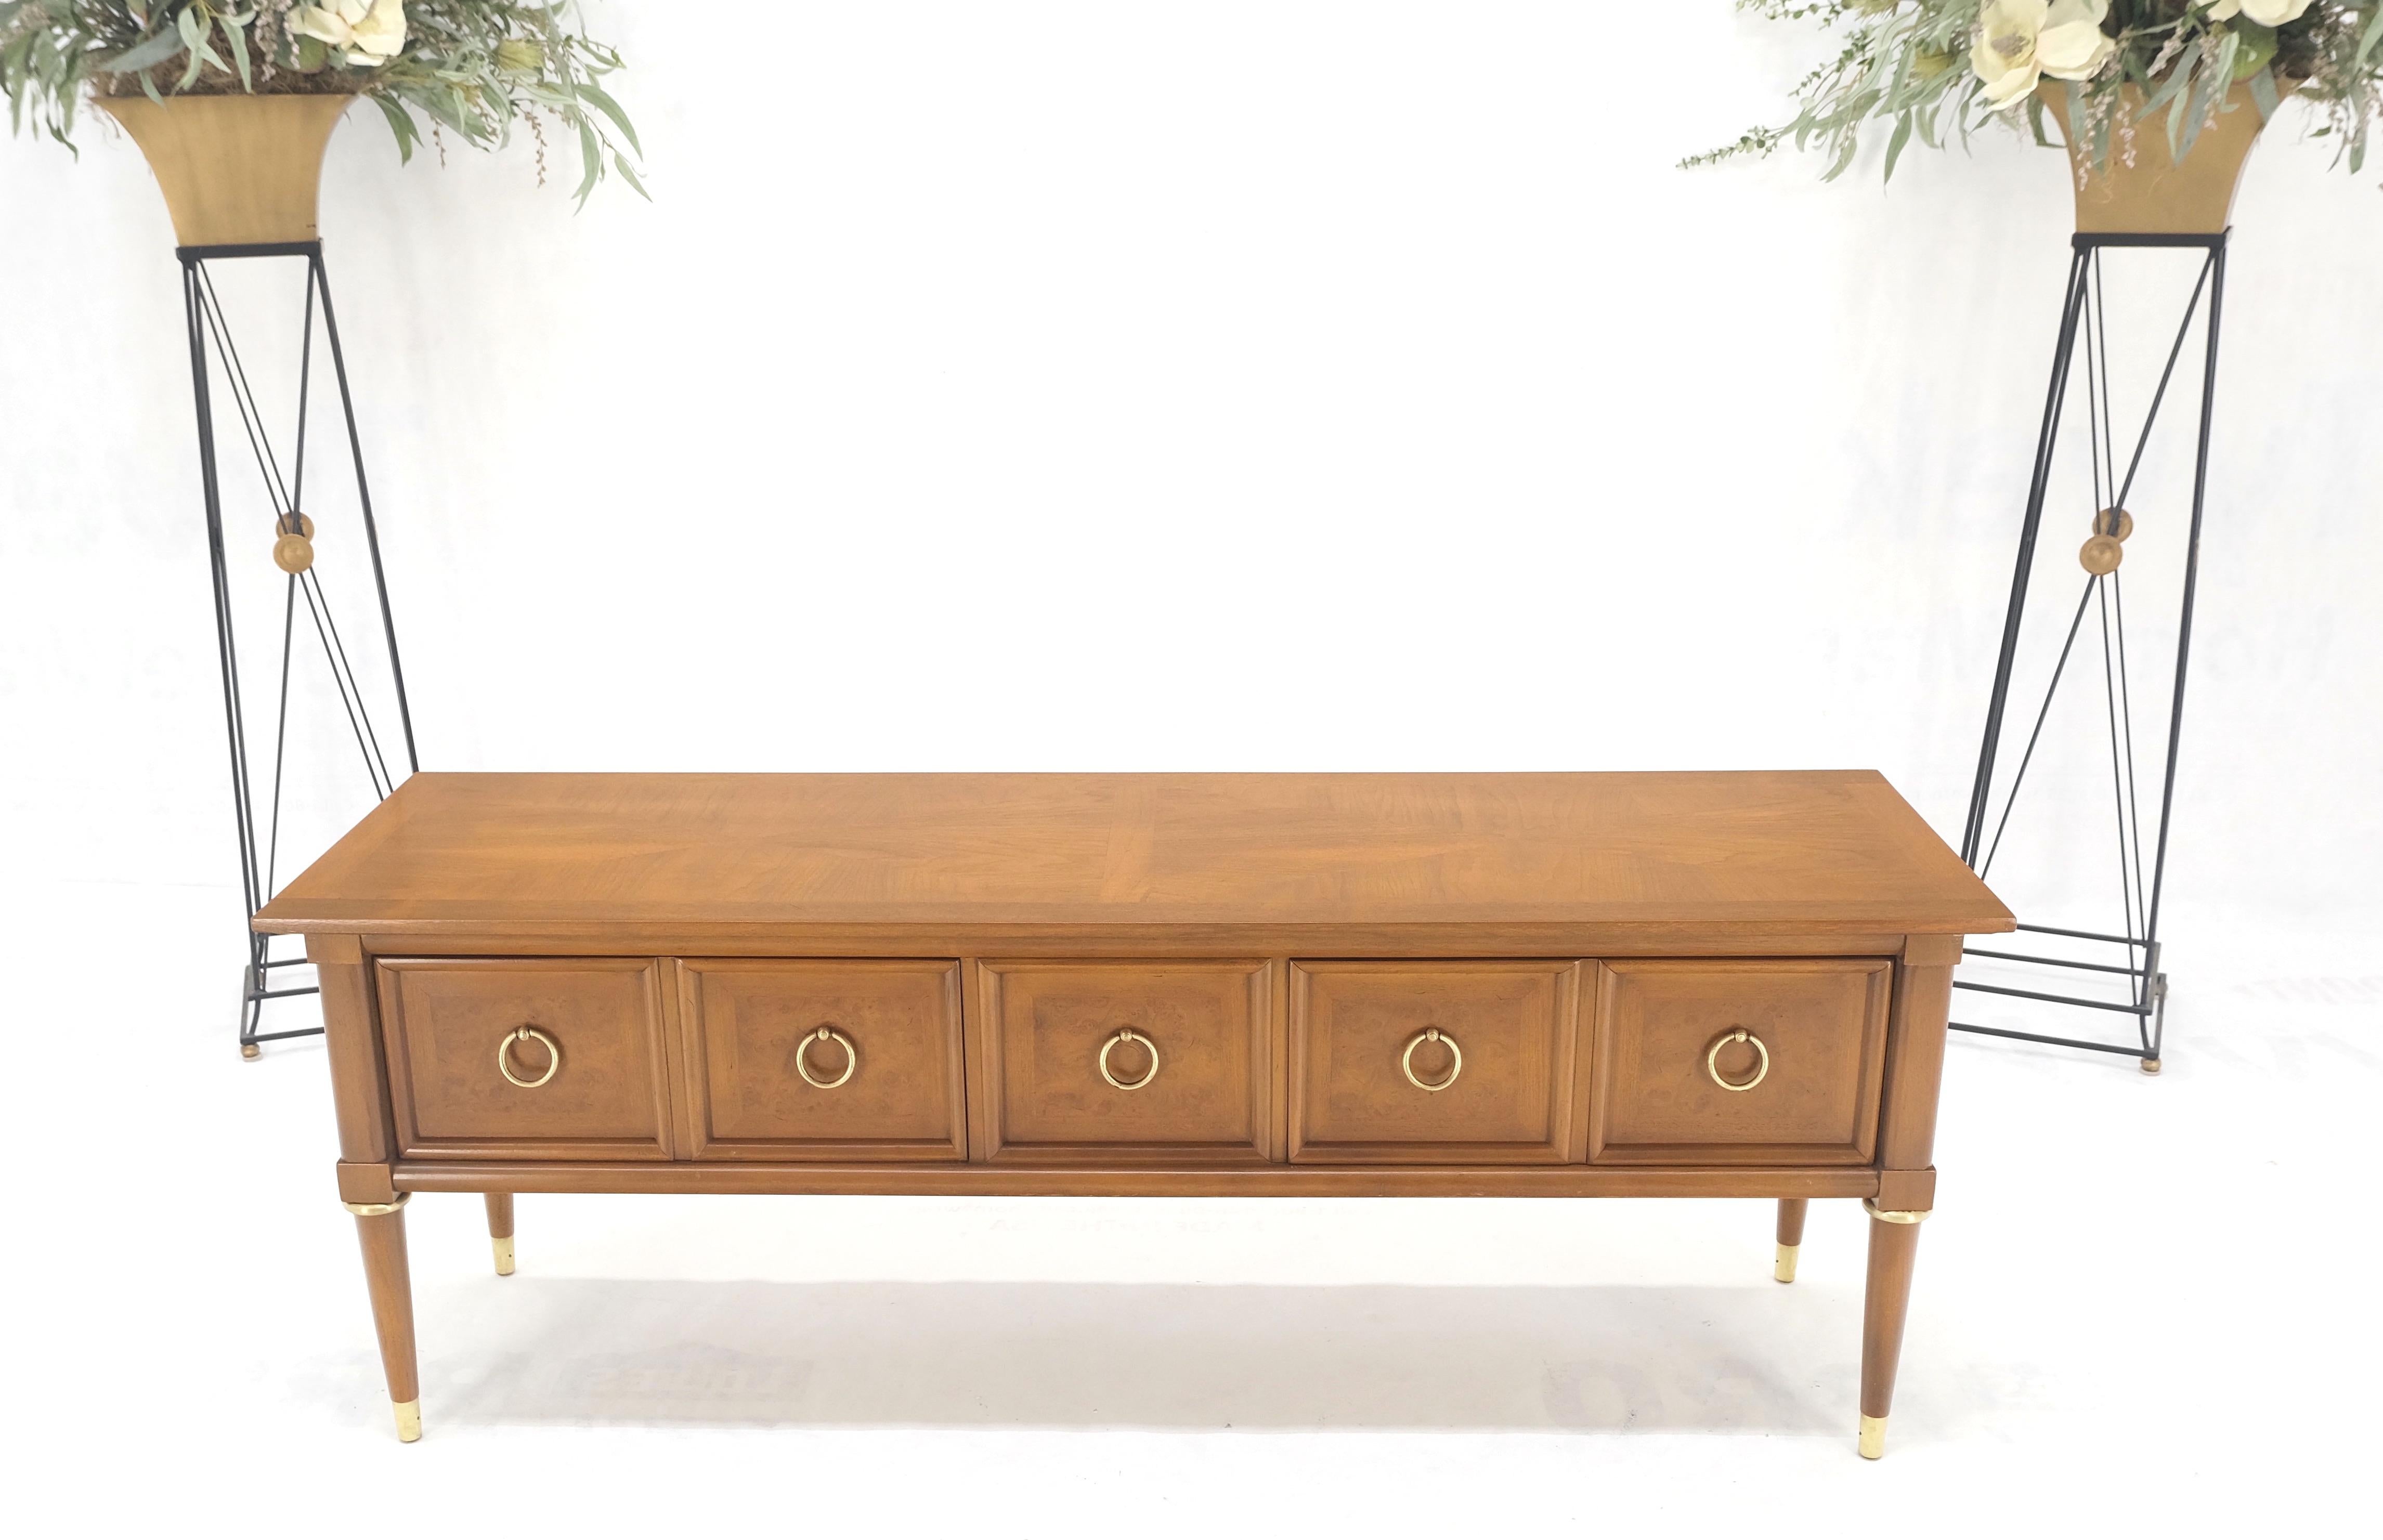 American Brass Drop Rings Pulls Low Profile Tapered Legs Long Credenza Mid Century MINT! For Sale